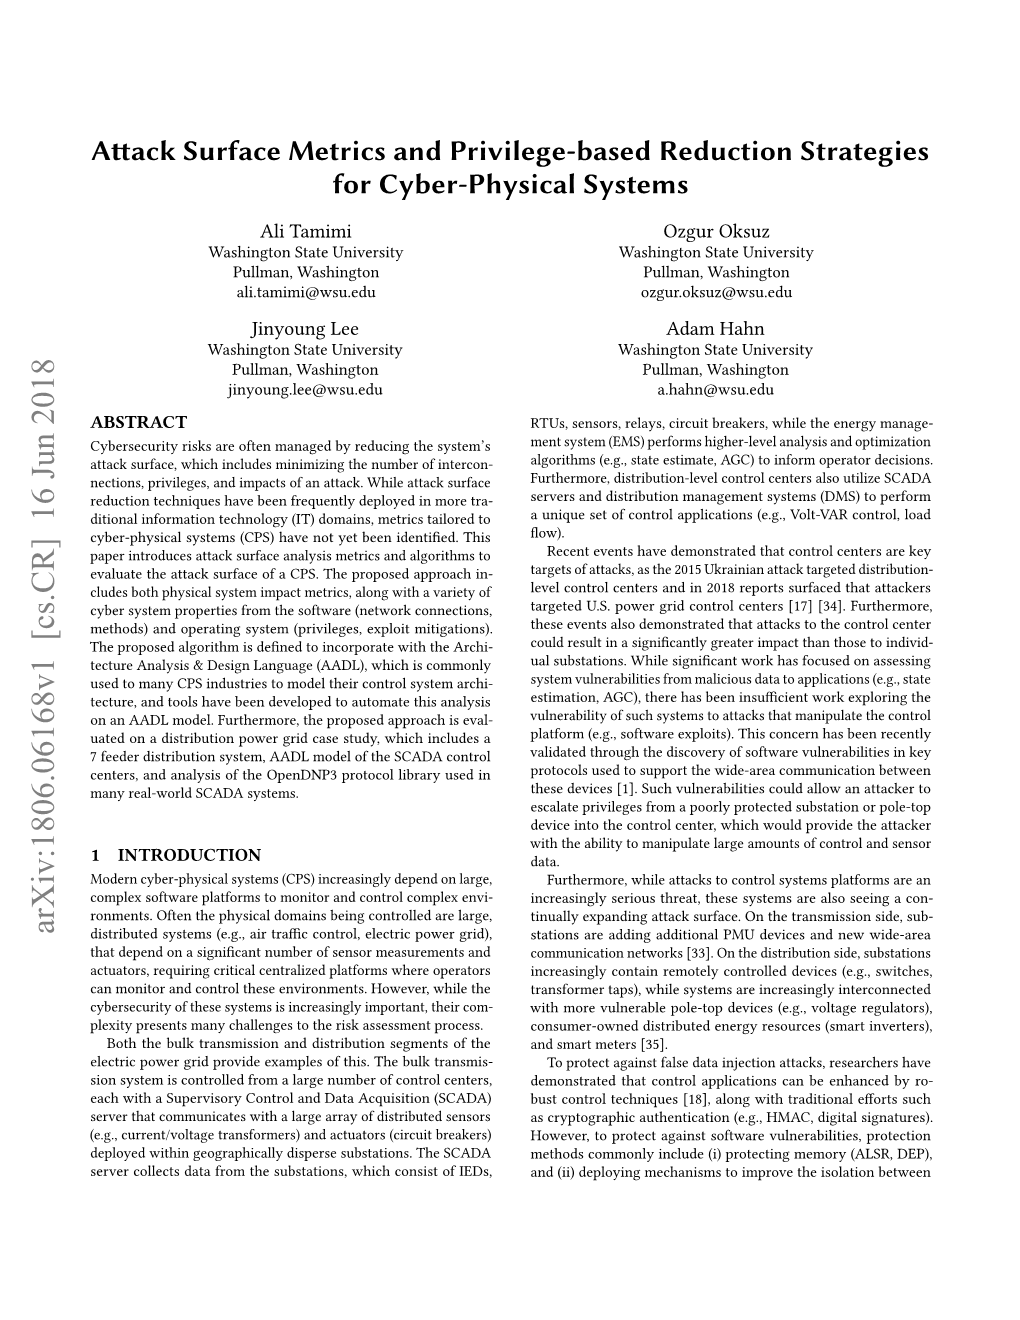 Attack Surface Metrics and Privilege-Based Reduction Strategies for Cyber-Physical Systems